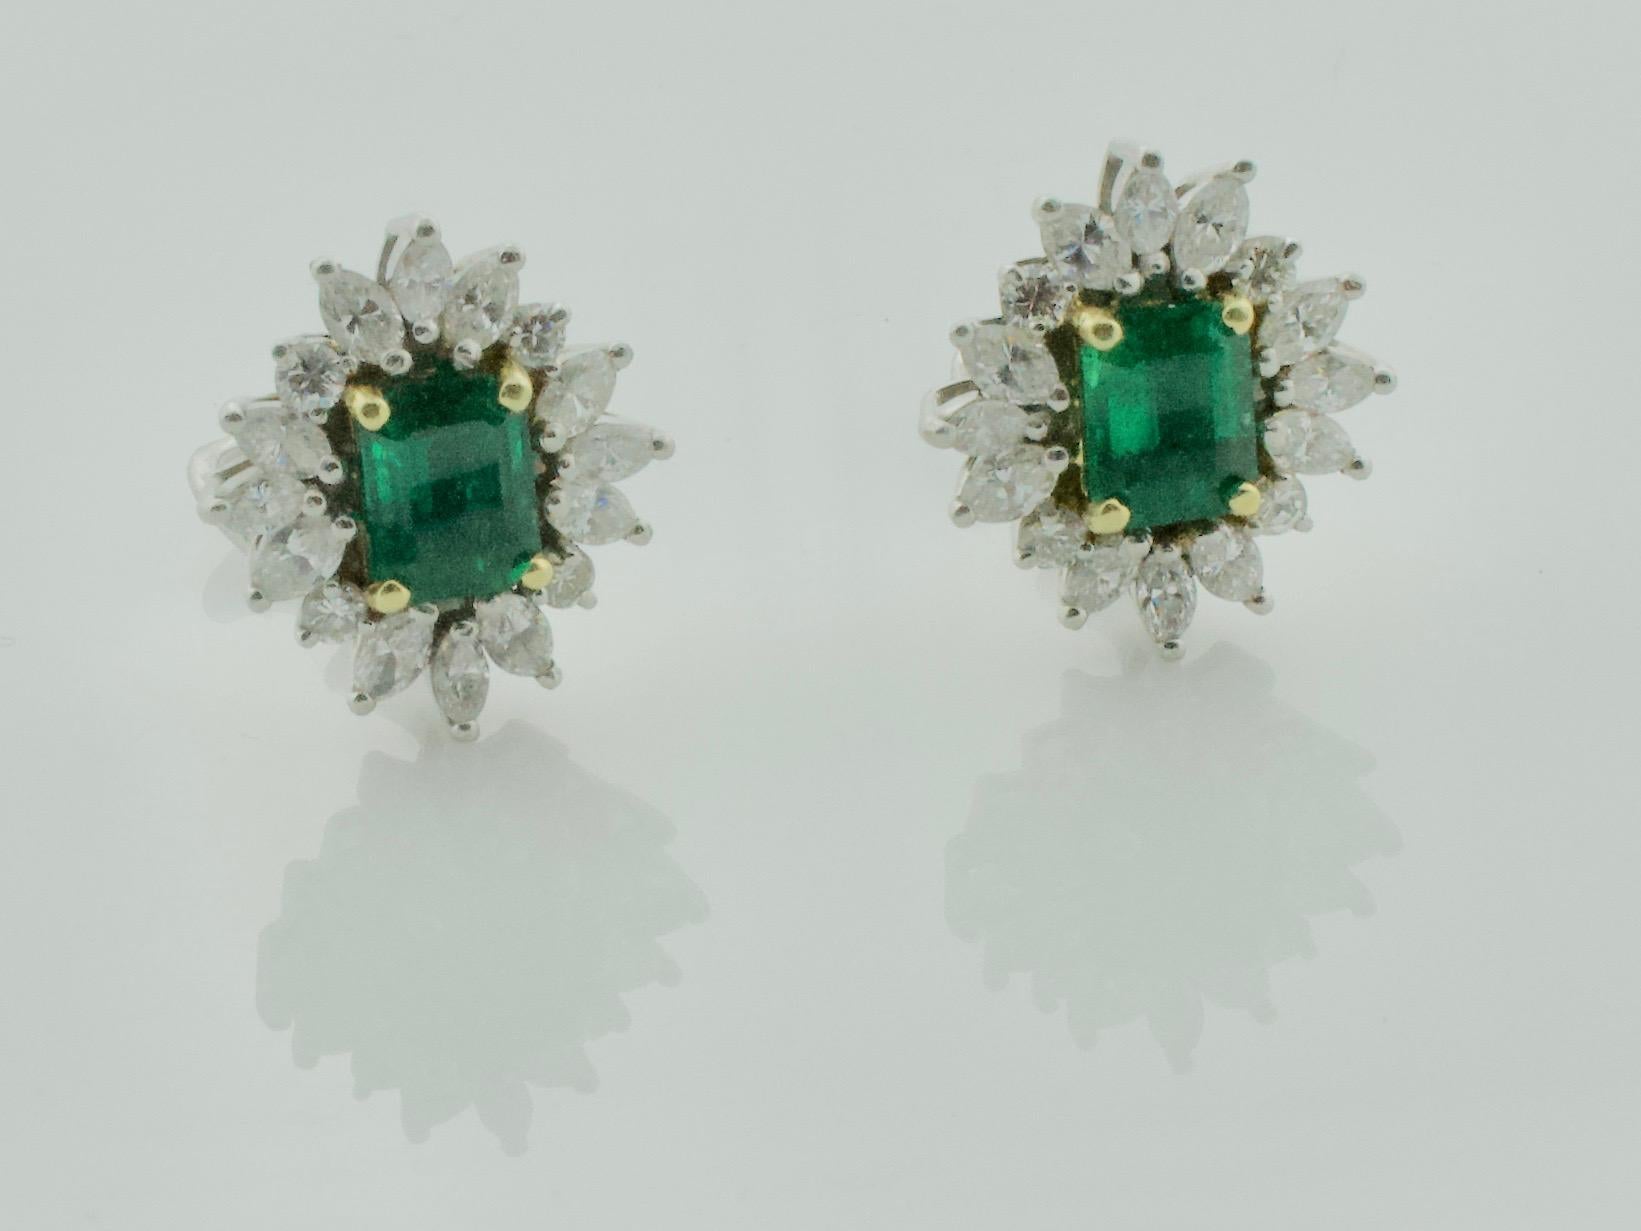 Emerald and Diamond Earrings with GIA Certification in Platinum
Classic Style and Wearability 
Two matched Emerald Cut Emeralds weighing 3.59 carats 
Twenty Four Marquise Cut Diamonds weighing 1.82 carats approximately
Eight Round Brilliant Cut